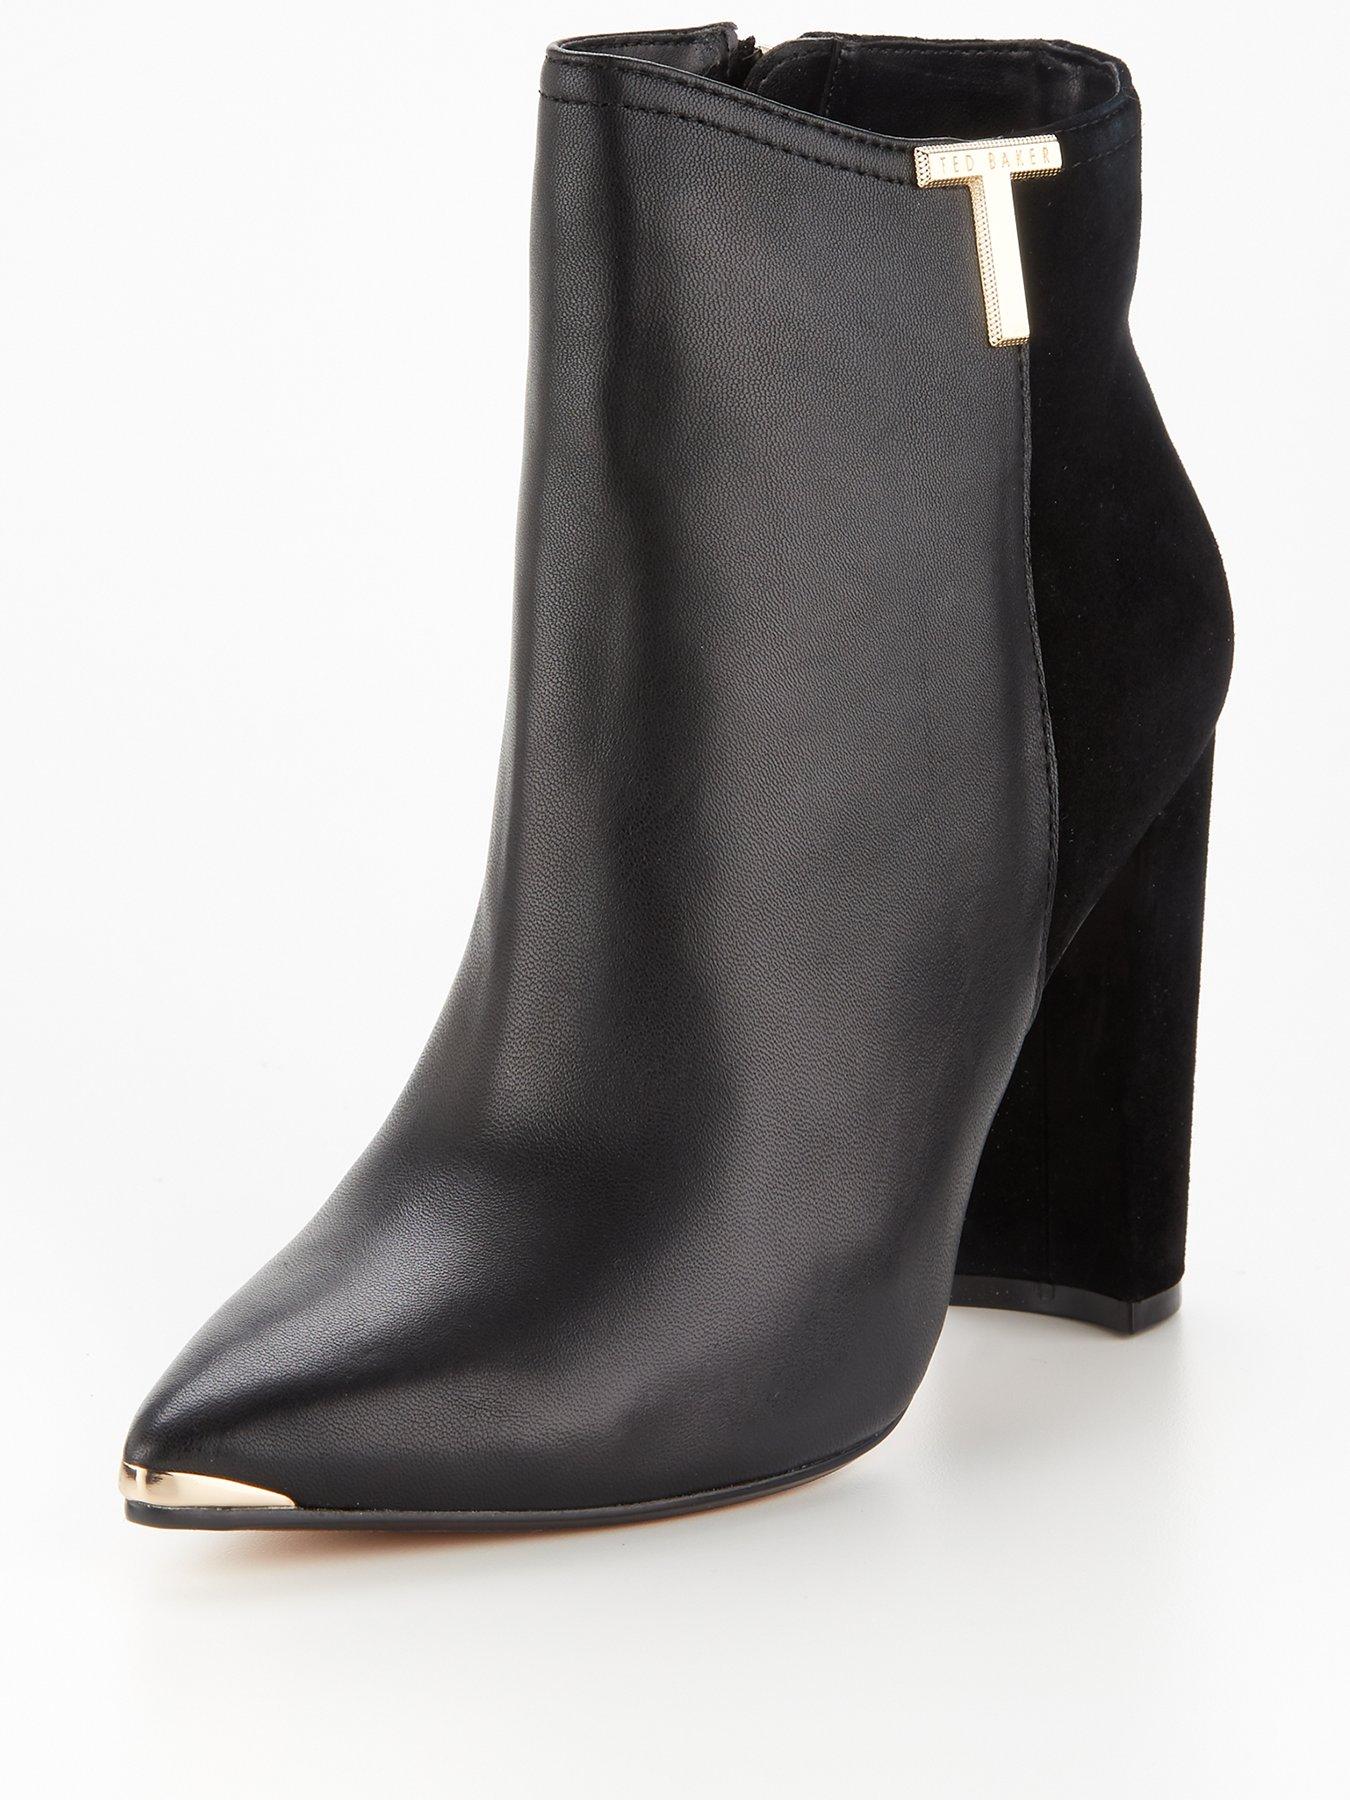 3 inch black ankle boots